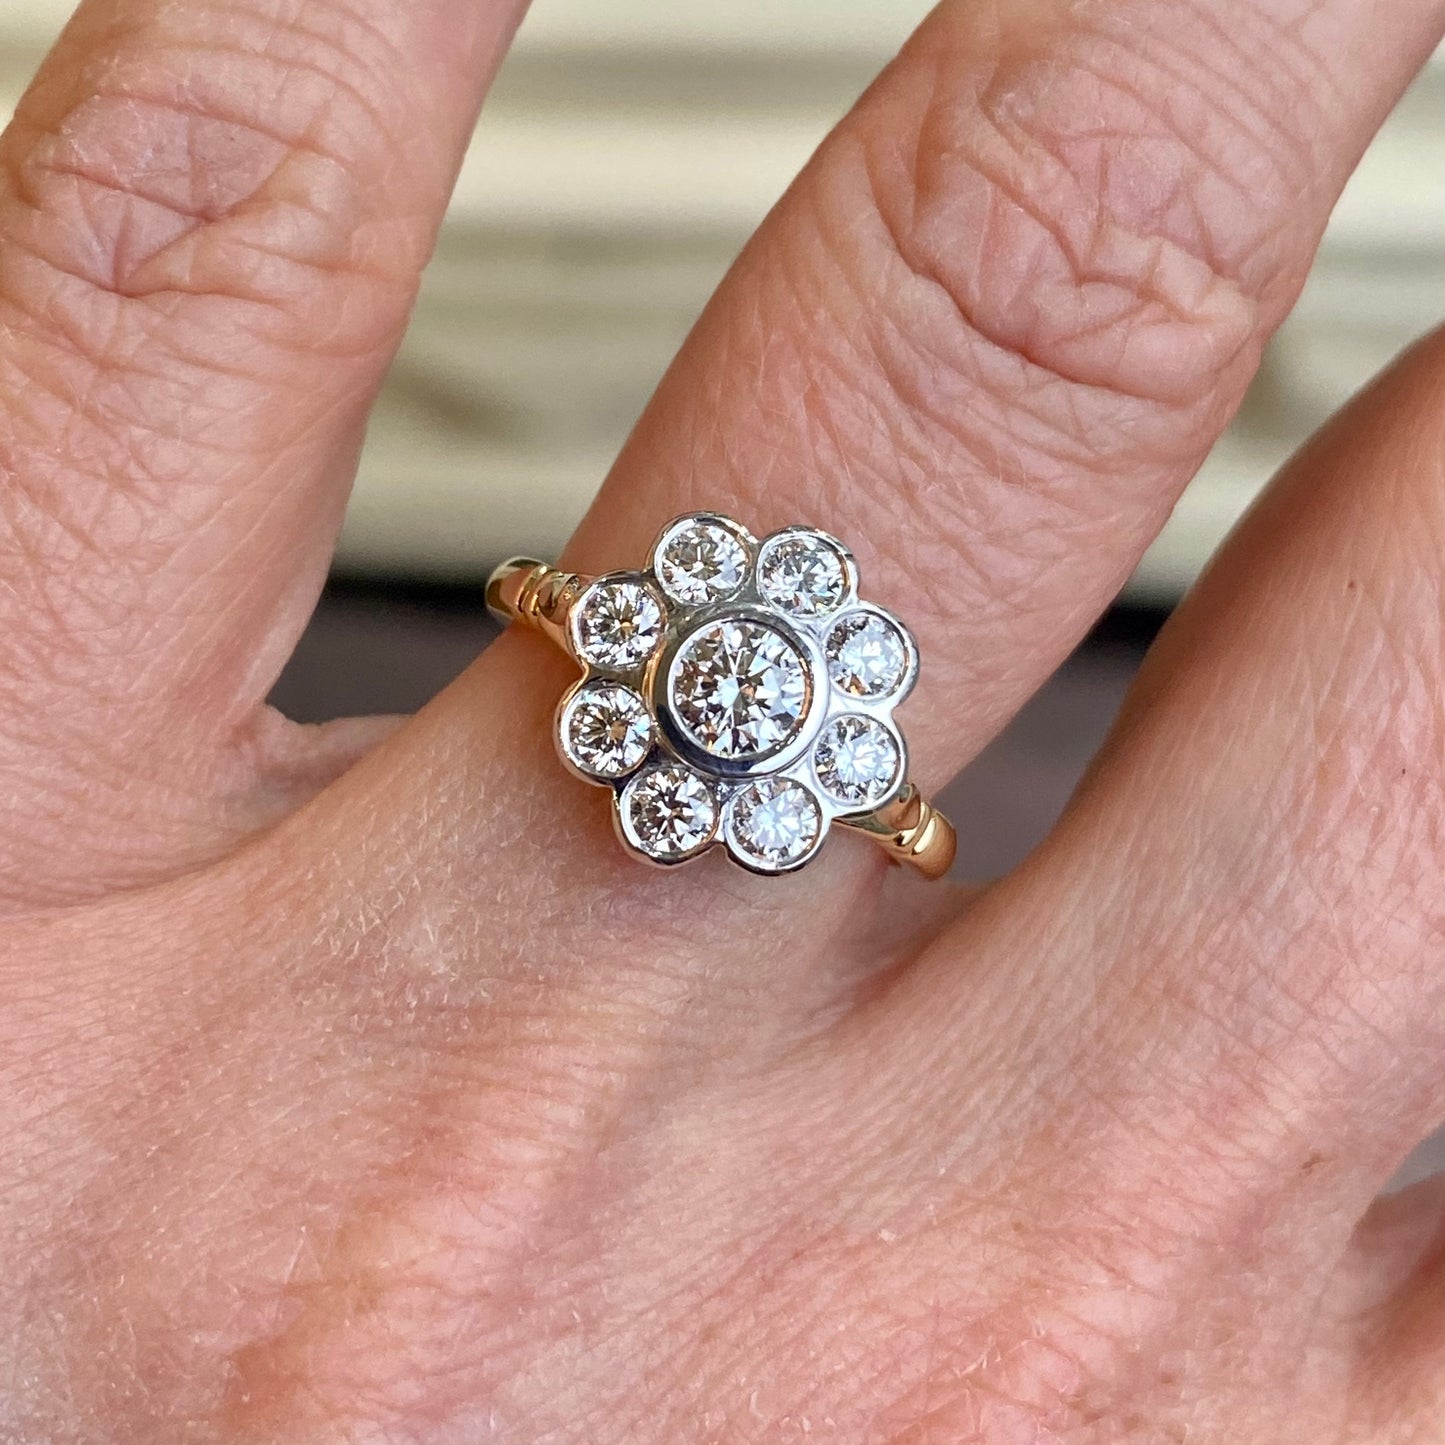 18ct Gold 1.02ct Diamond Flower Cluster Ring   Centre Diamond: 0.31ct  Eight Diamonds surrounding the Centre Diamond: 0.71ct in total.    All round brilliant cut diamonds, GH SI approximately.  18ct white gold rub-over setting.  18ct yellow gold shank size N.